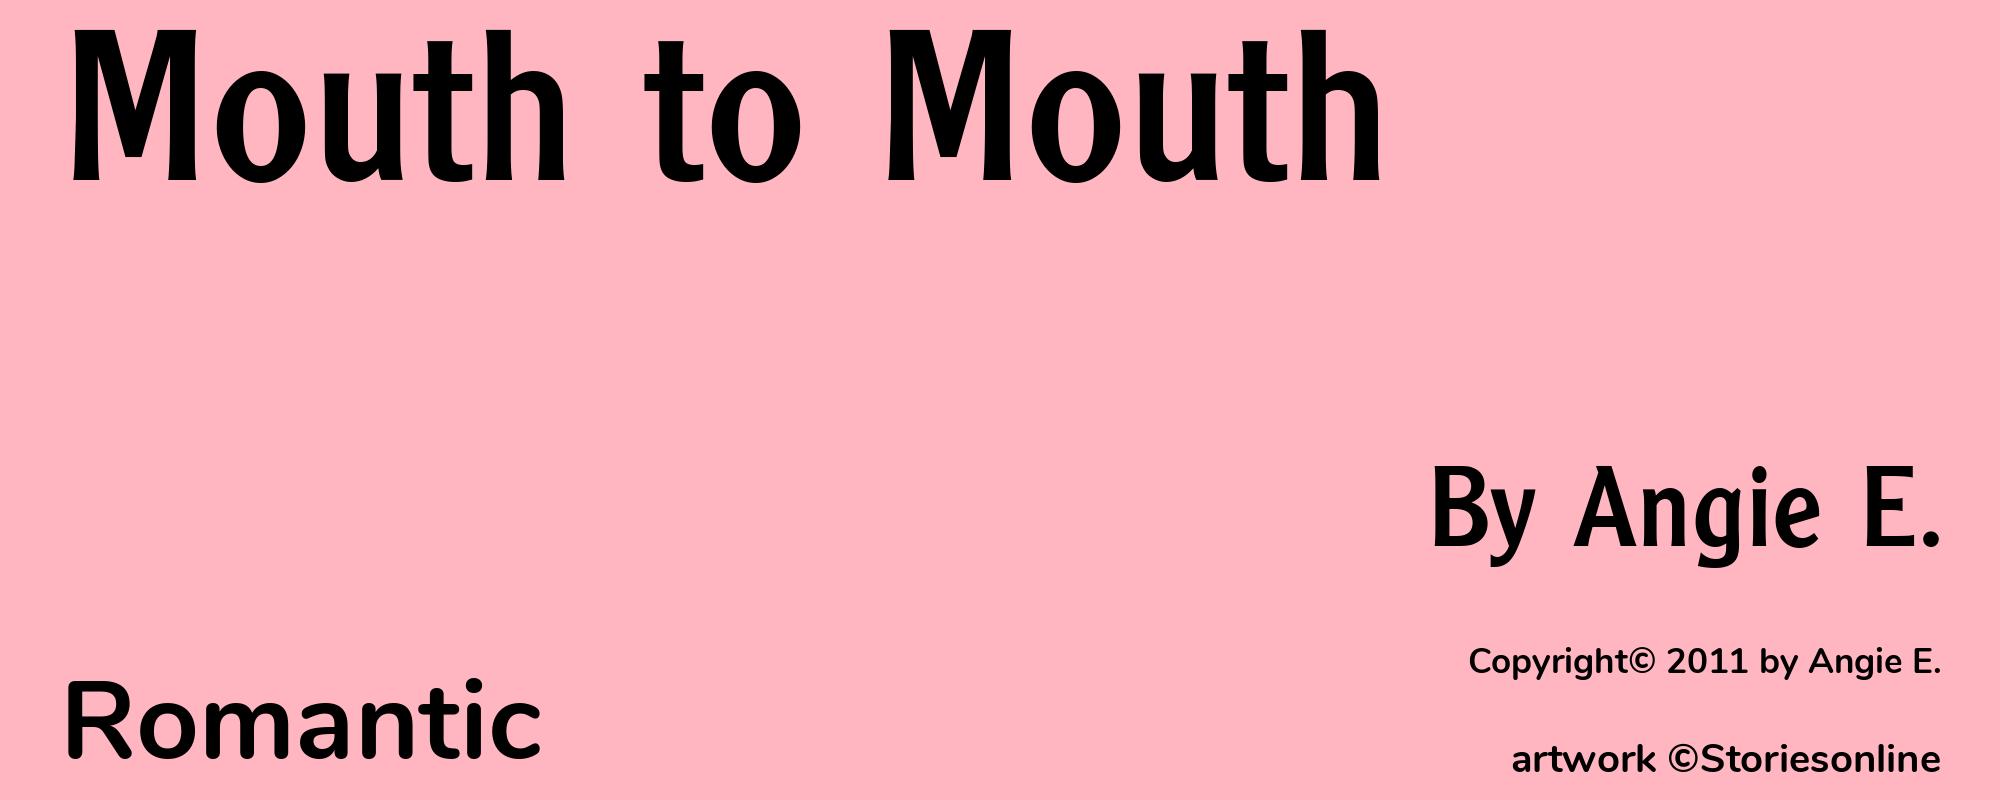 Mouth to Mouth - Cover